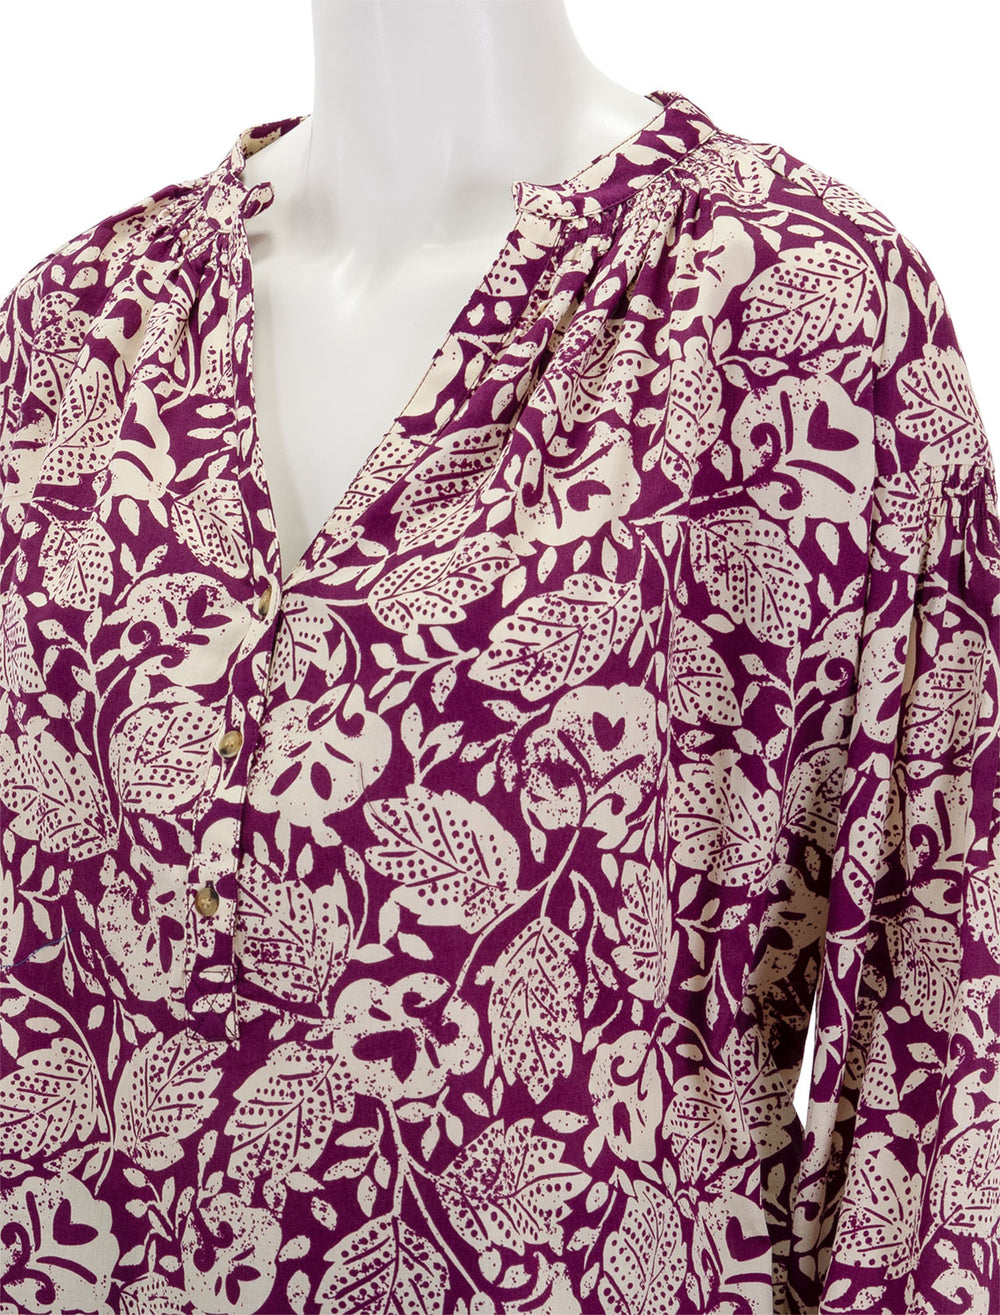 Close-up view of Vanessa Bruno's nipoa top in plum floral.